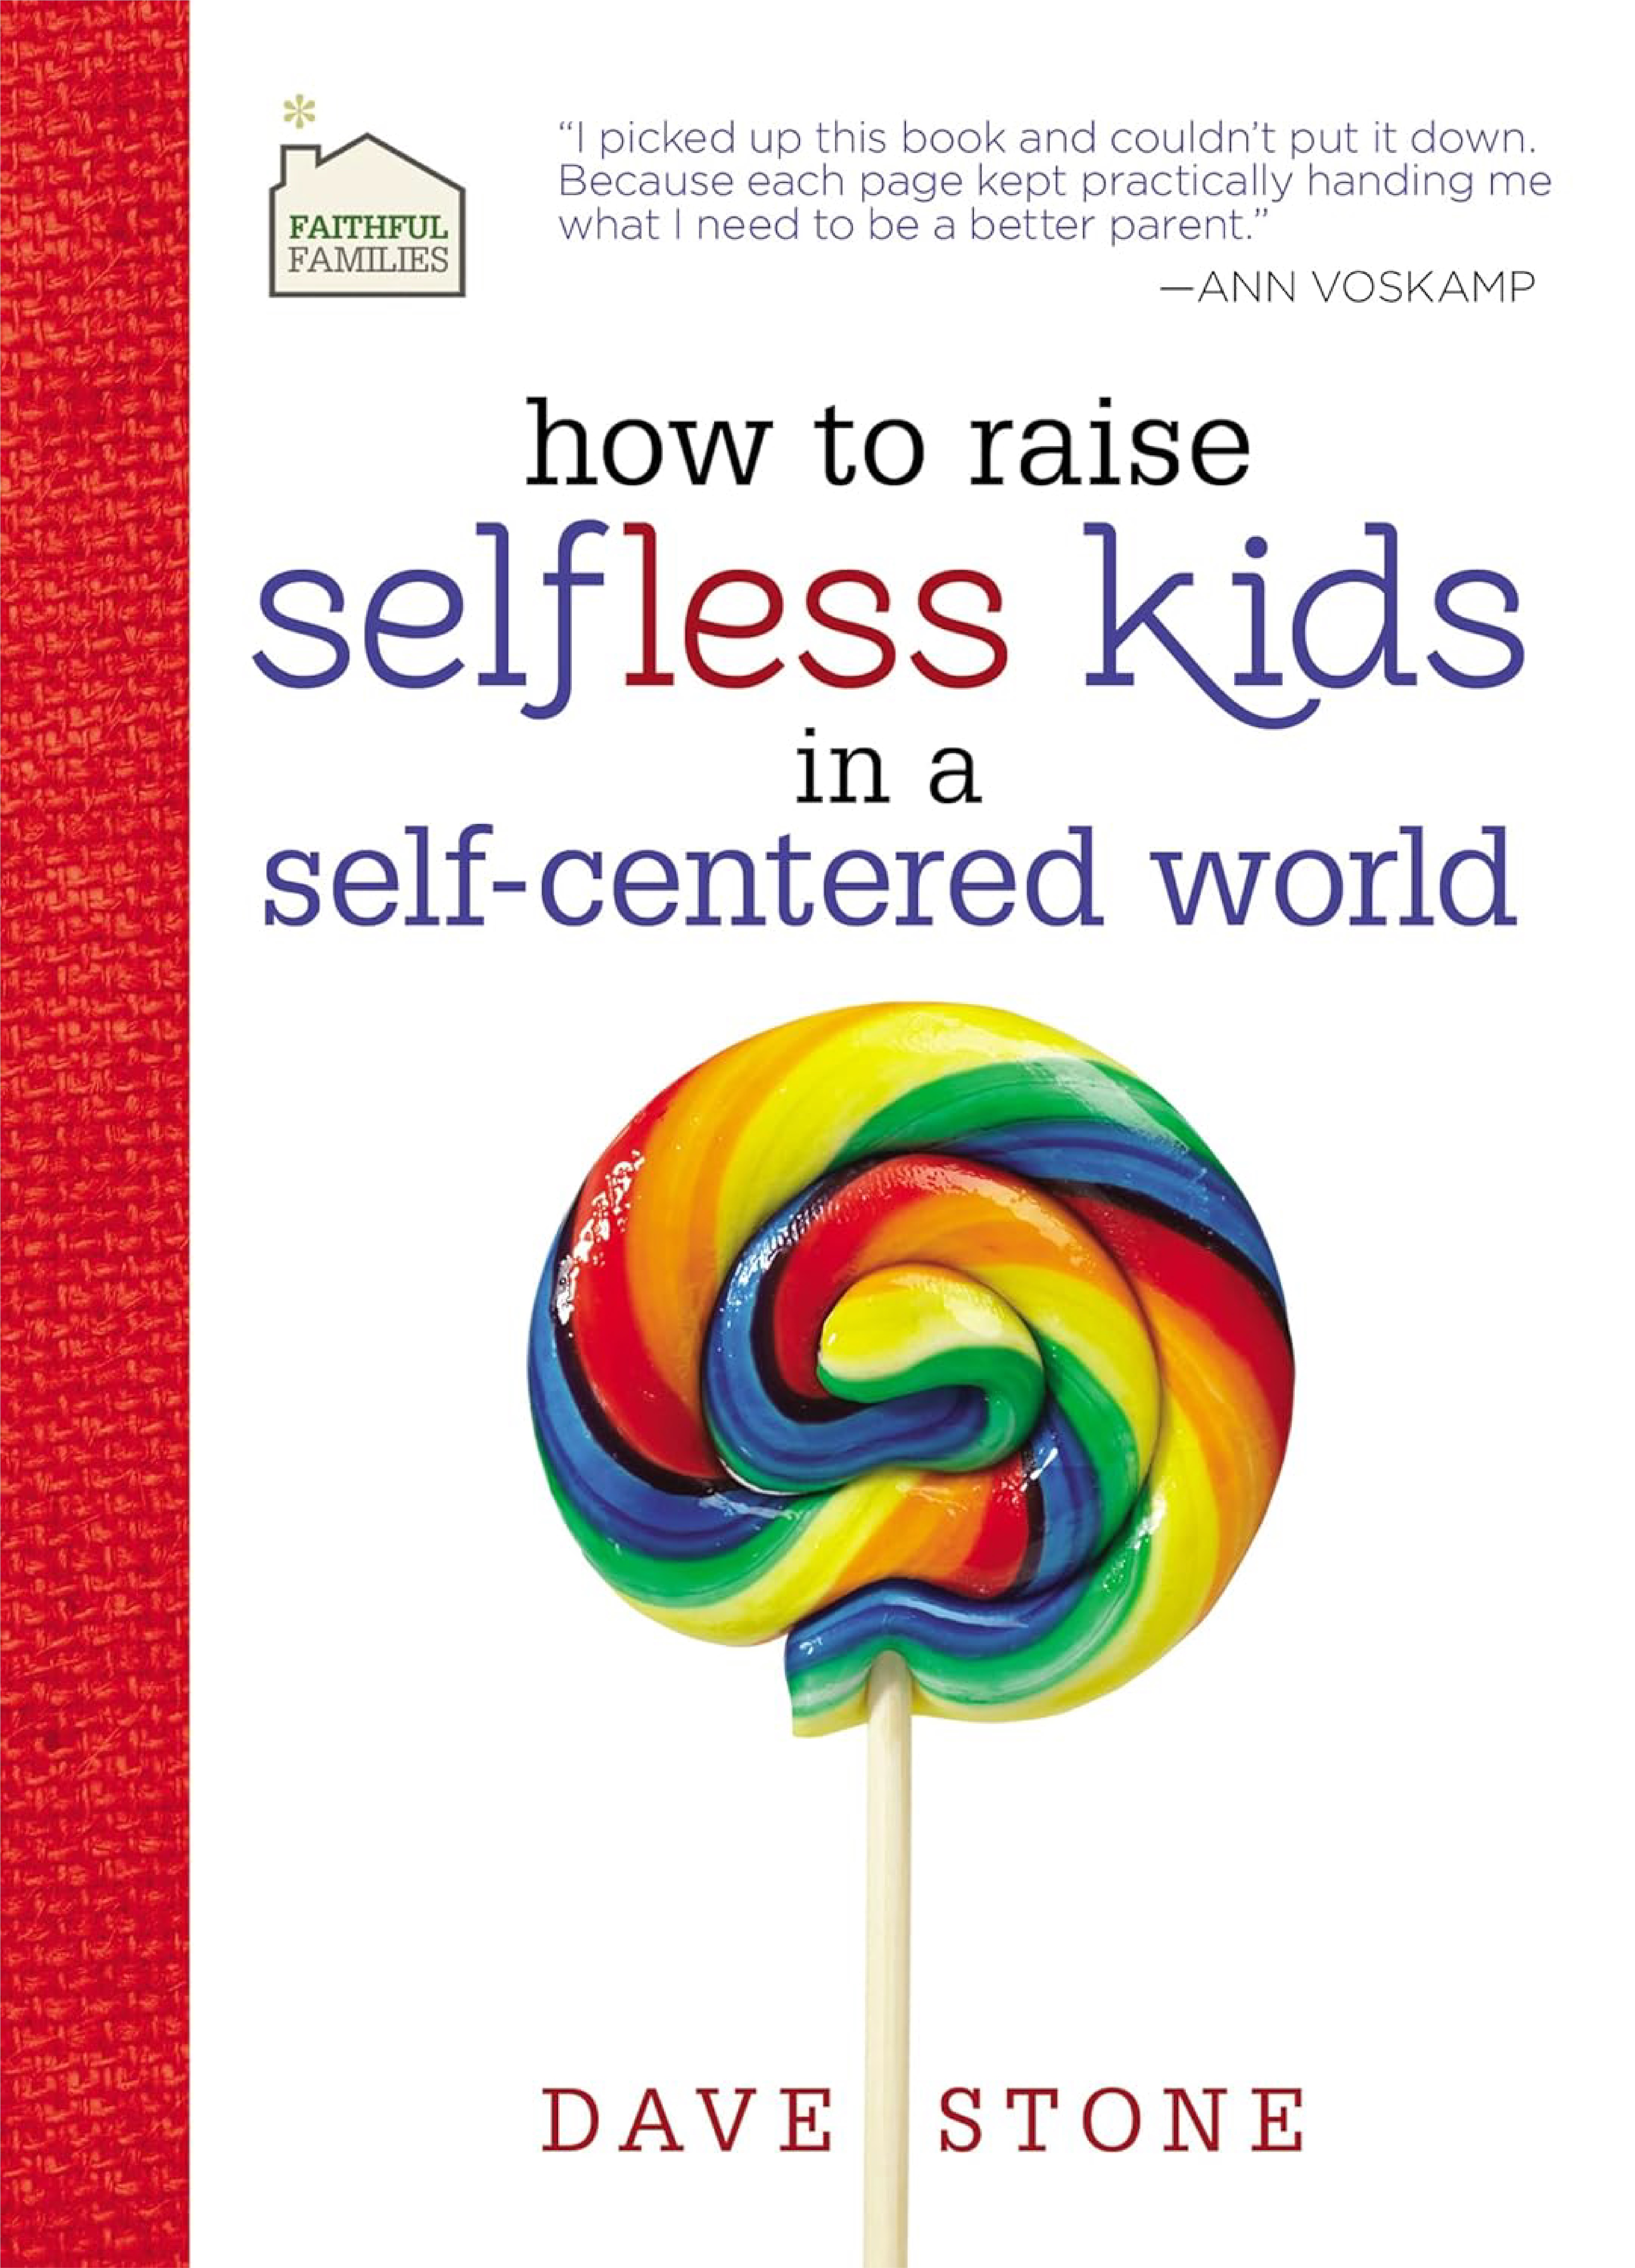 How to Raise Selfless Kids in a Self-Centered World Book Cover